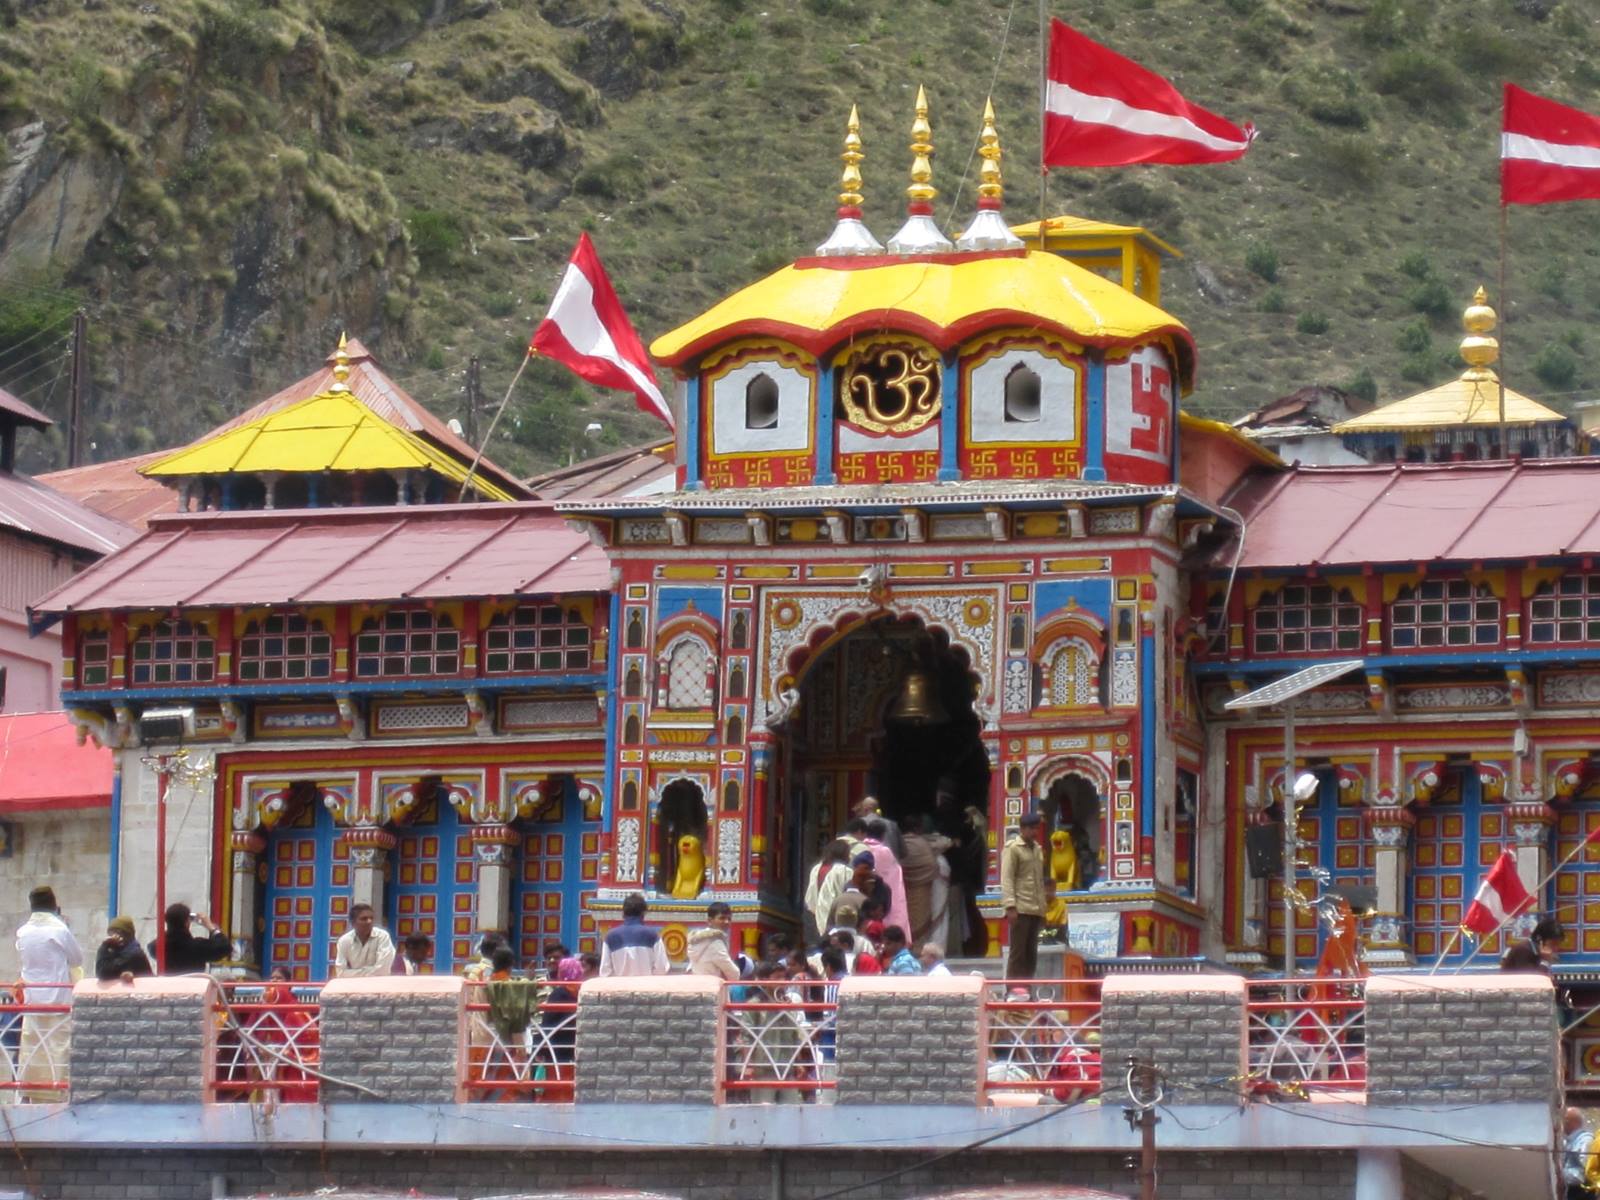 12-astounding-facts-about-badrinath-temple